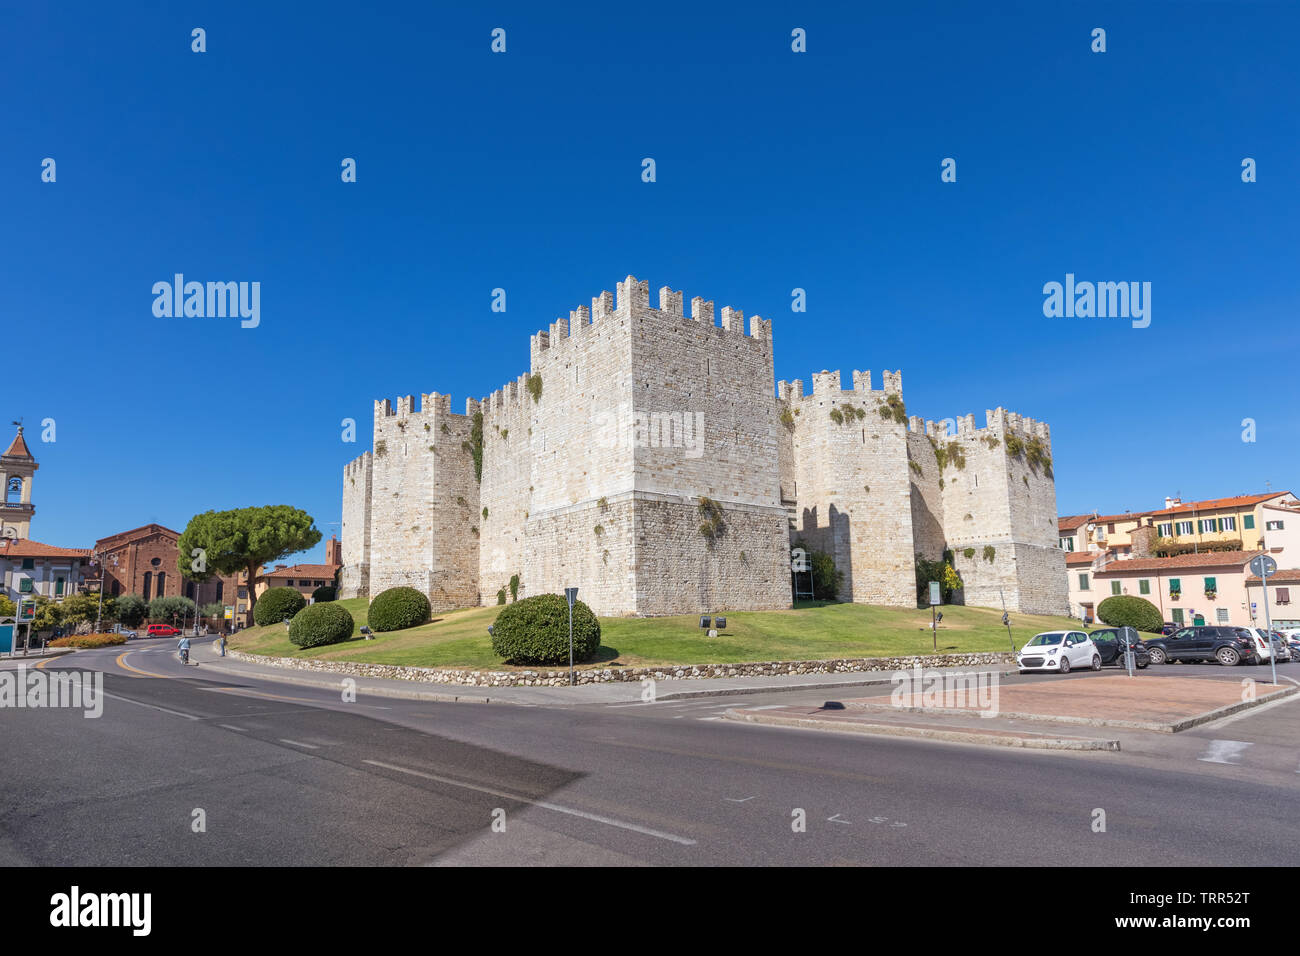 Castello dell'Imperatore - medieval castle with crenellated walls and towers built for emperor Frederick II in Prato, Italy Stock Photo